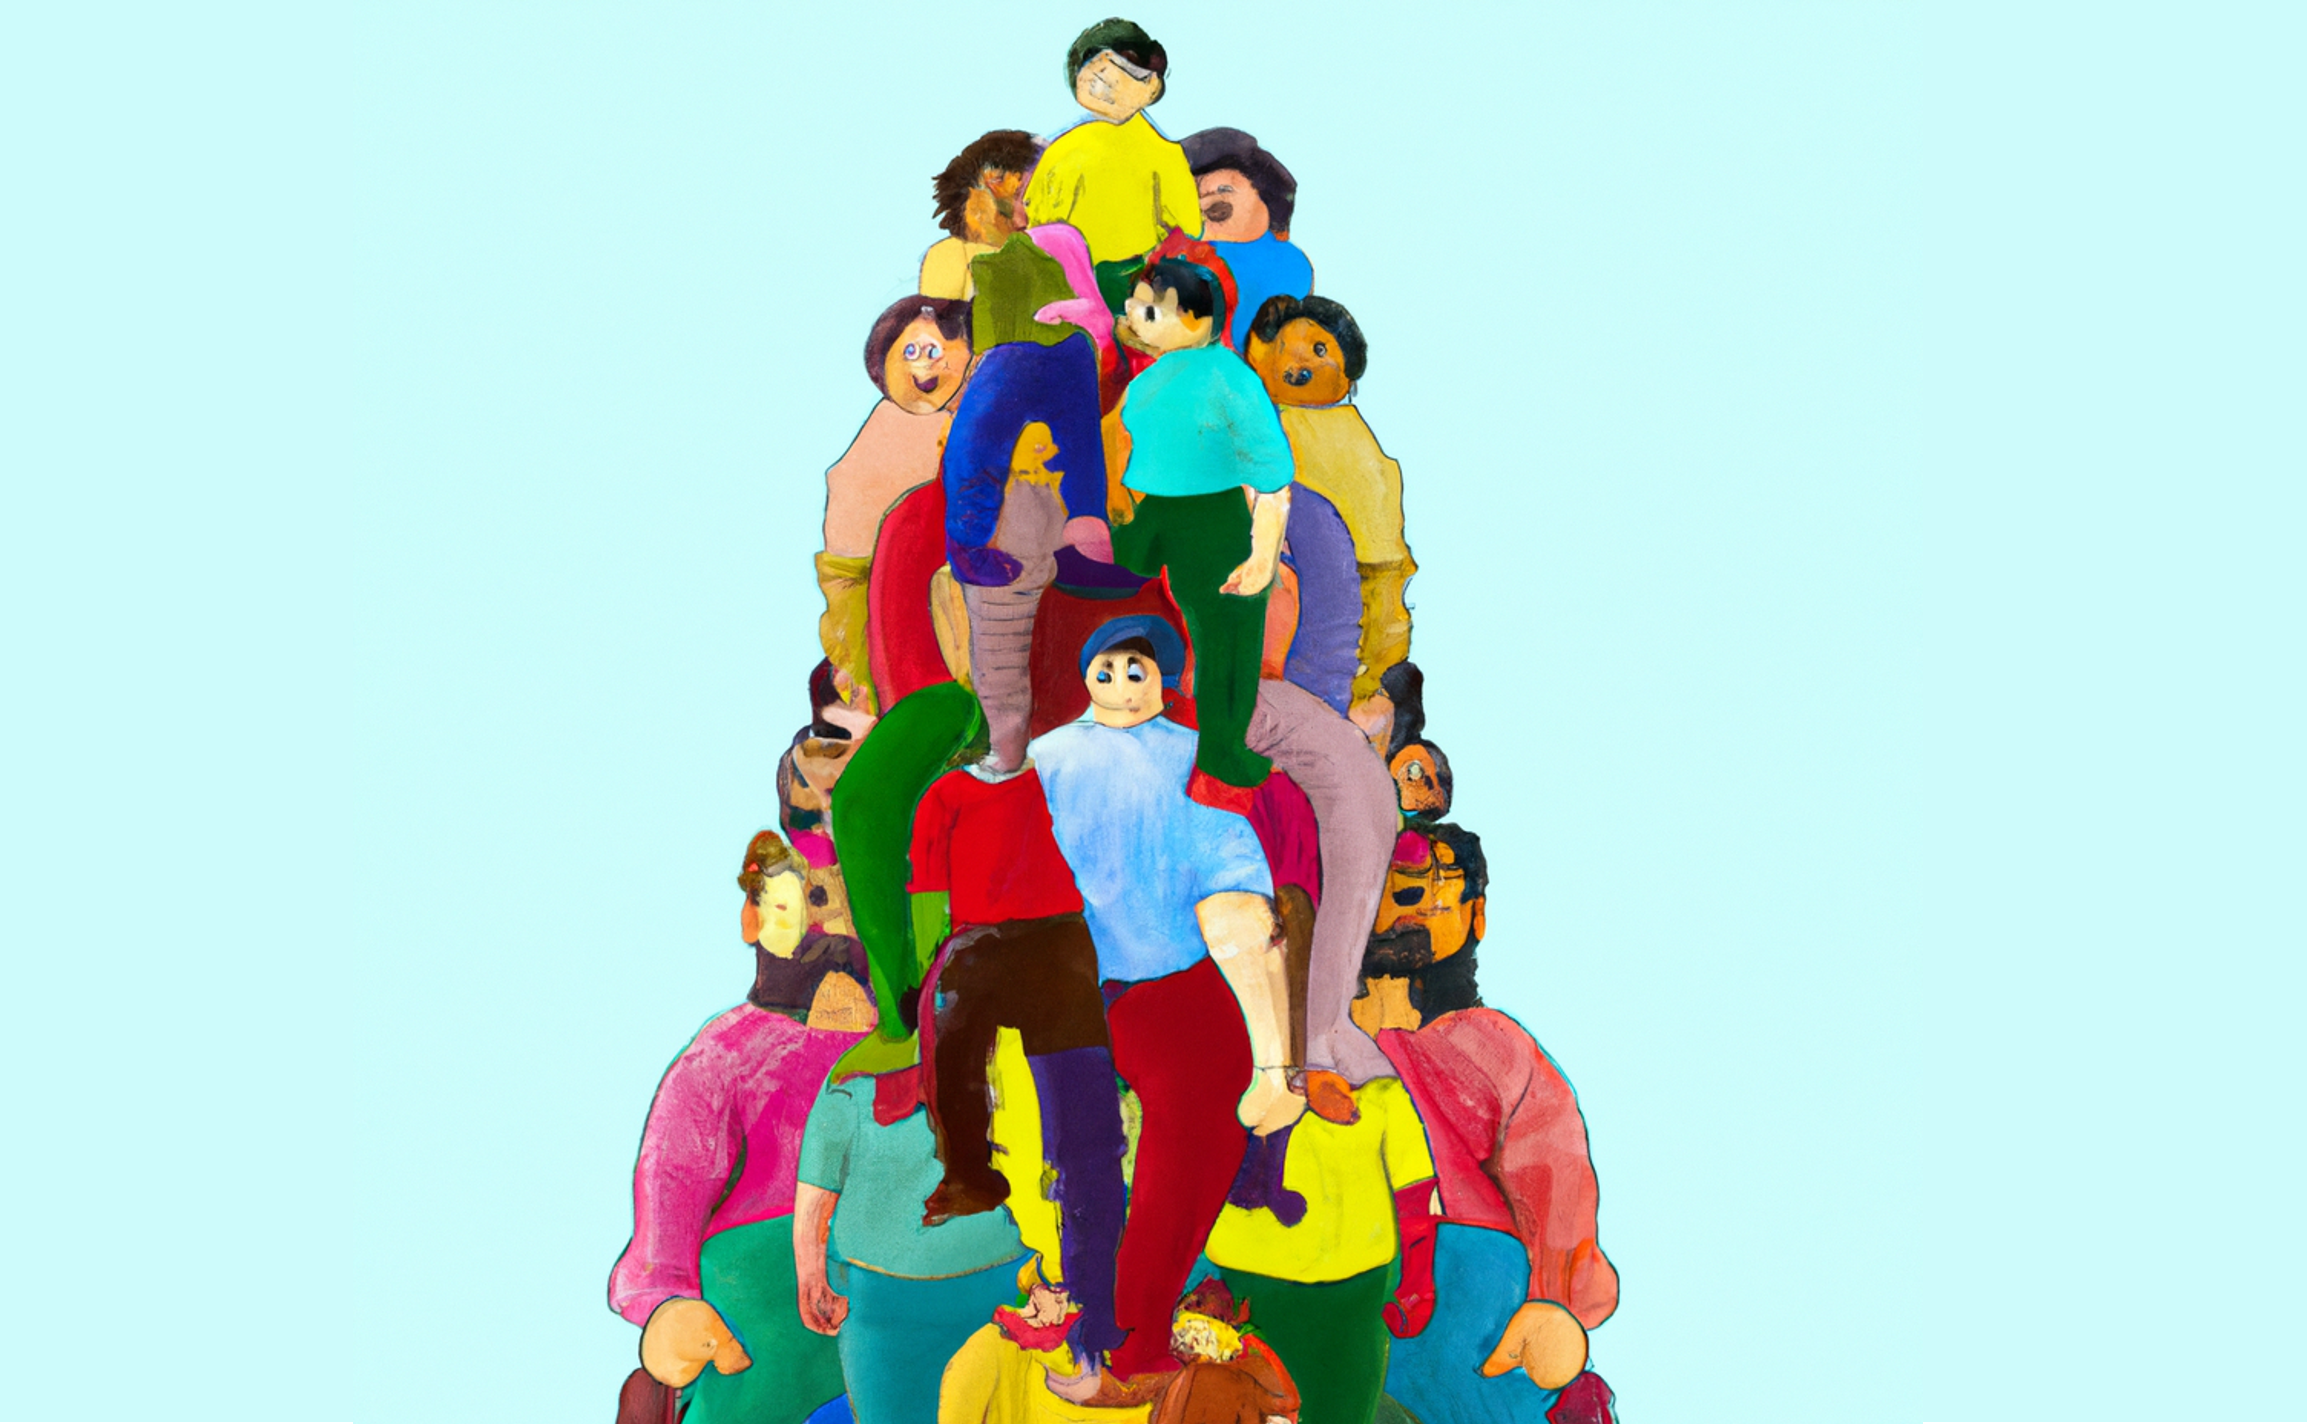 abstract artwork showing people standing over eachother, forming a pyramid